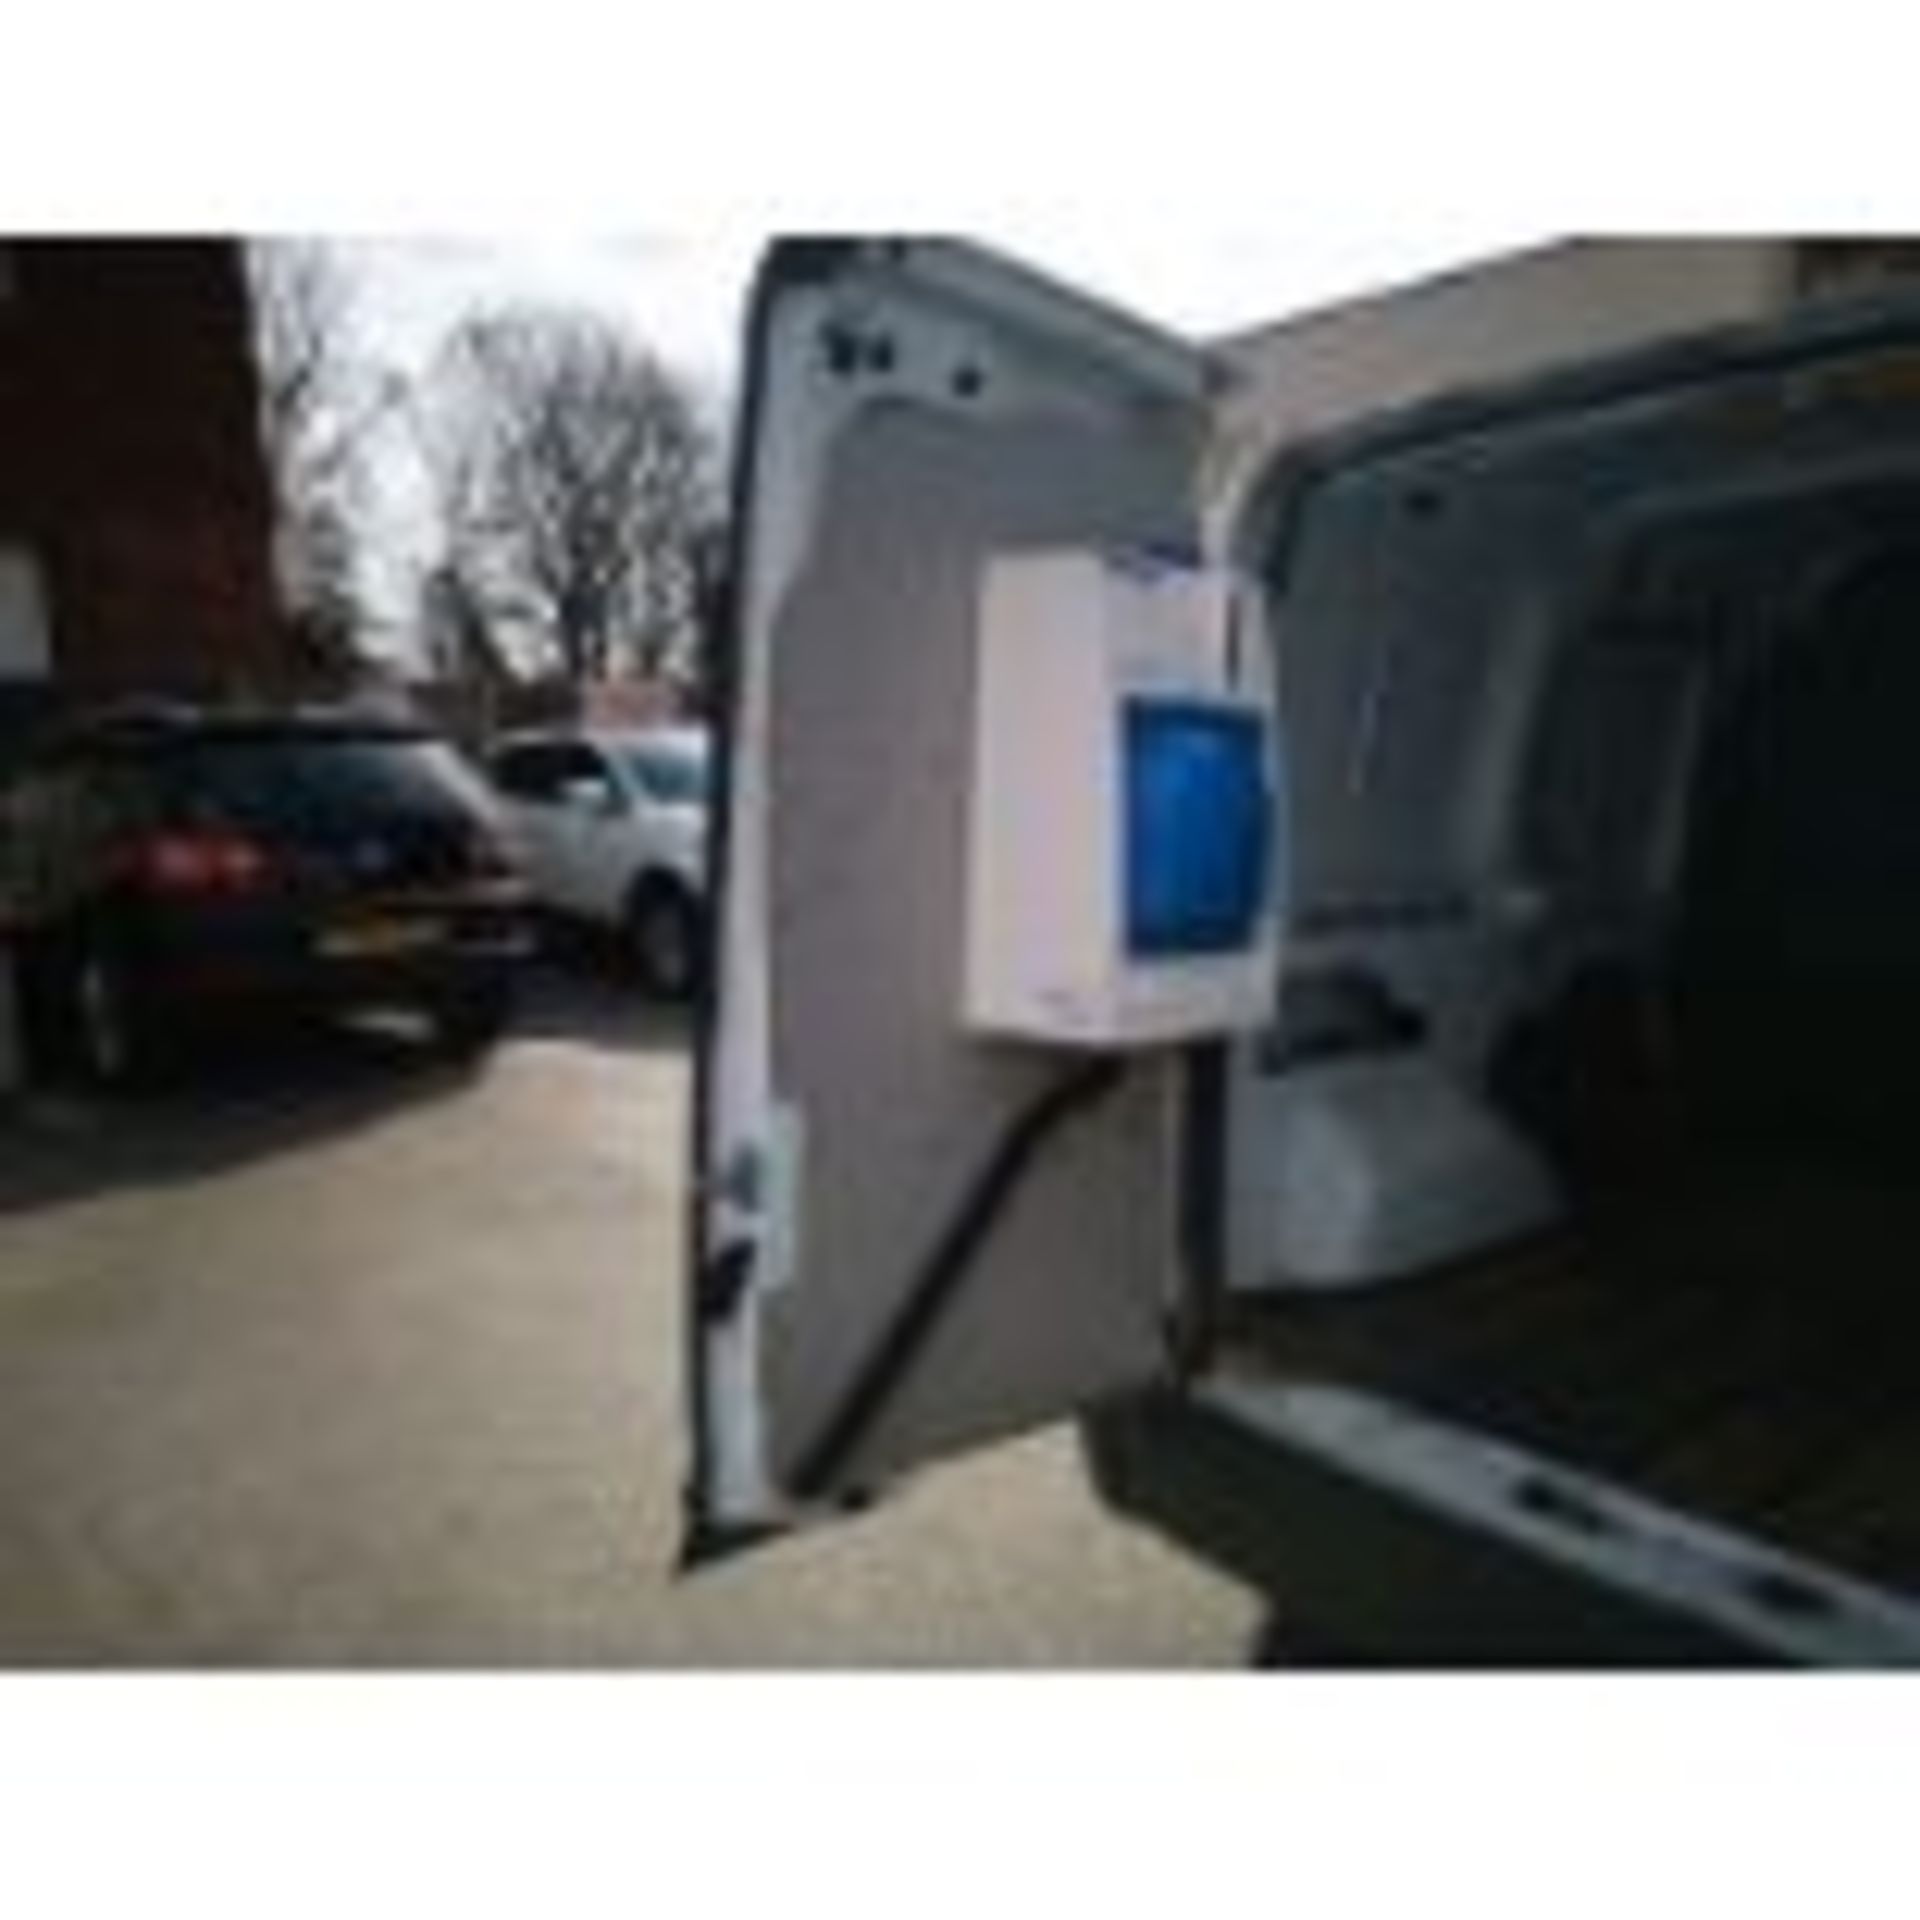 ENTRY DIRECT FROM LOCAL AUTHORITY Ford Transit Con - Image 22 of 23